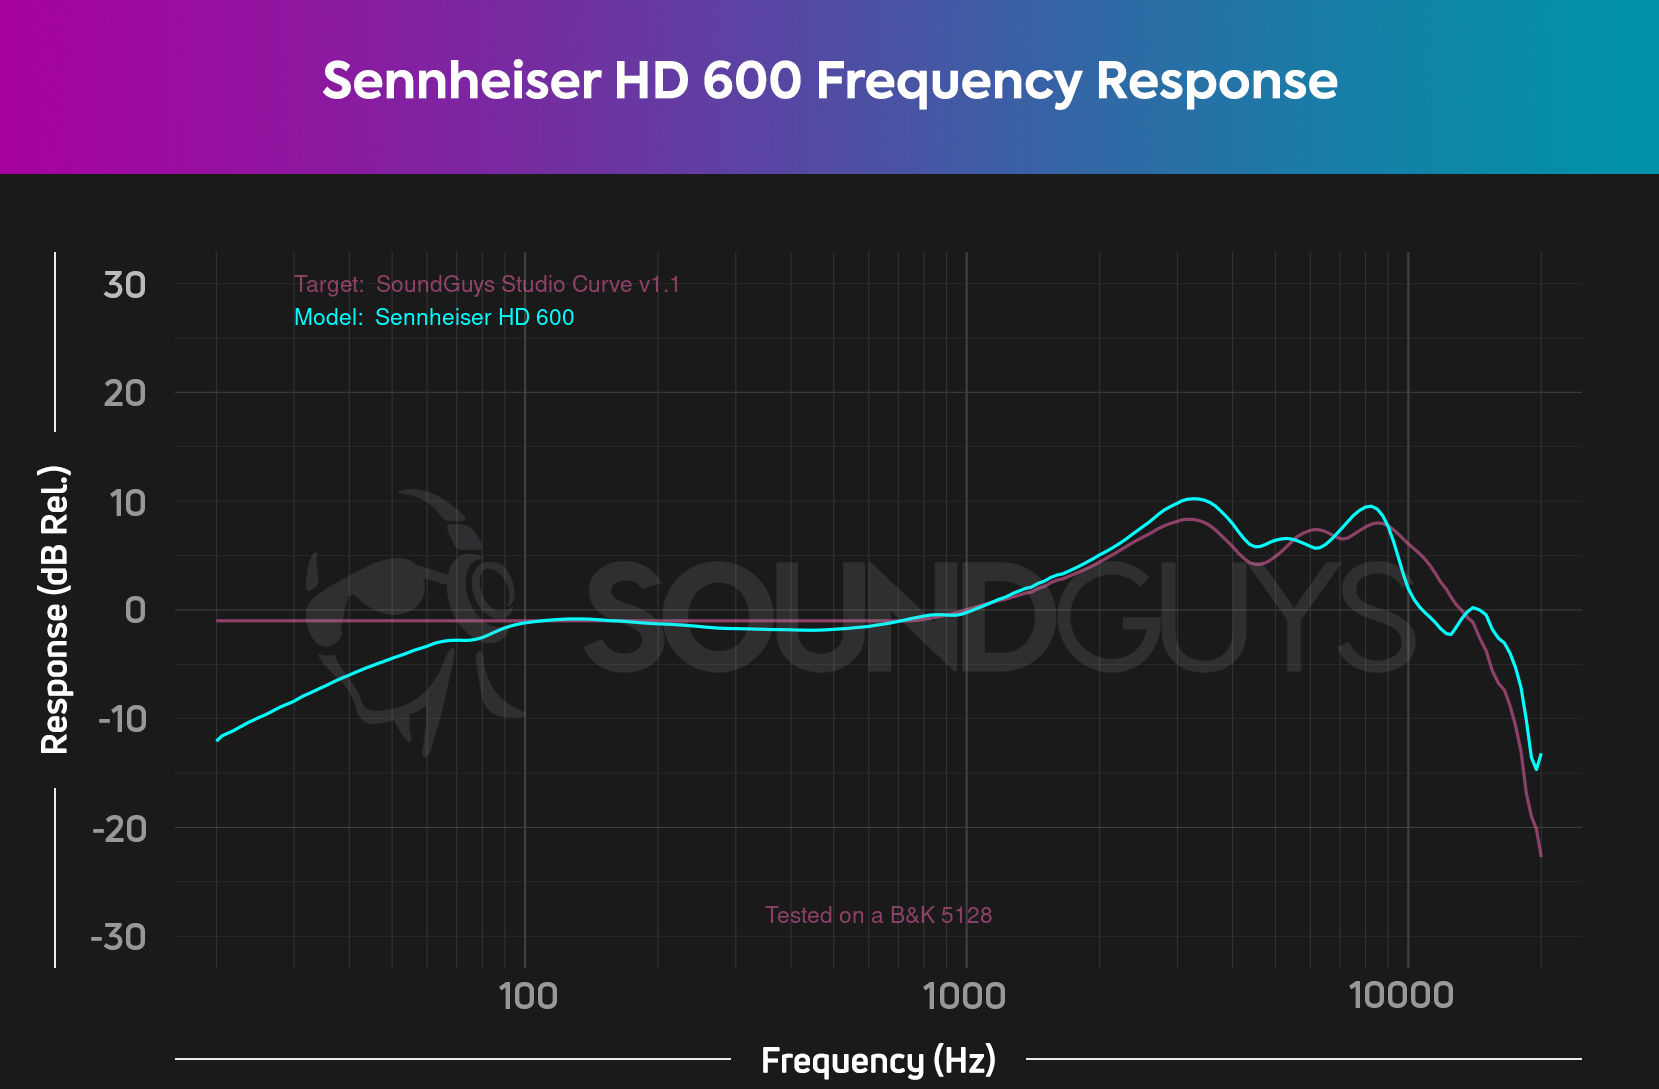 Though there's a rolloff in the sub-bass, the Sennheiser HD 600 holds to the SoundGuys studio curve extremely well.